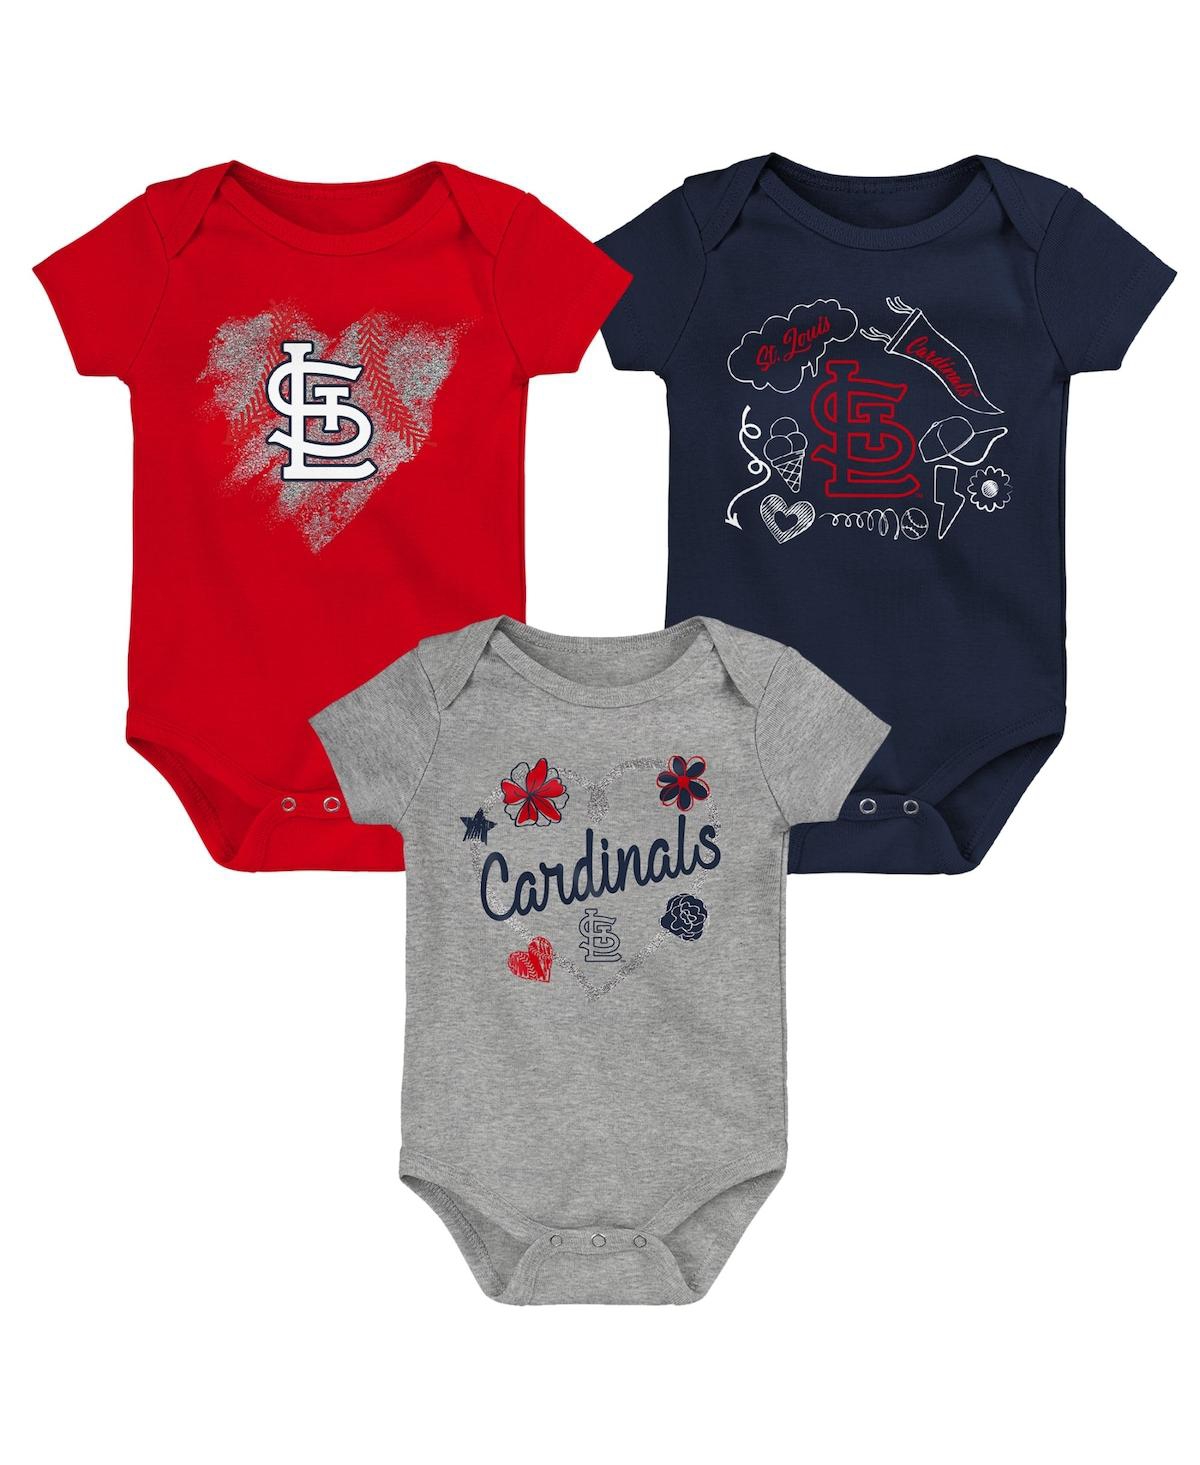 OUTERSTUFF INFANT BOYS AND GIRLS RED, NAVY, GRAY ST. LOUIS CARDINALS BATTER UP 3-PACK BODYSUIT SET